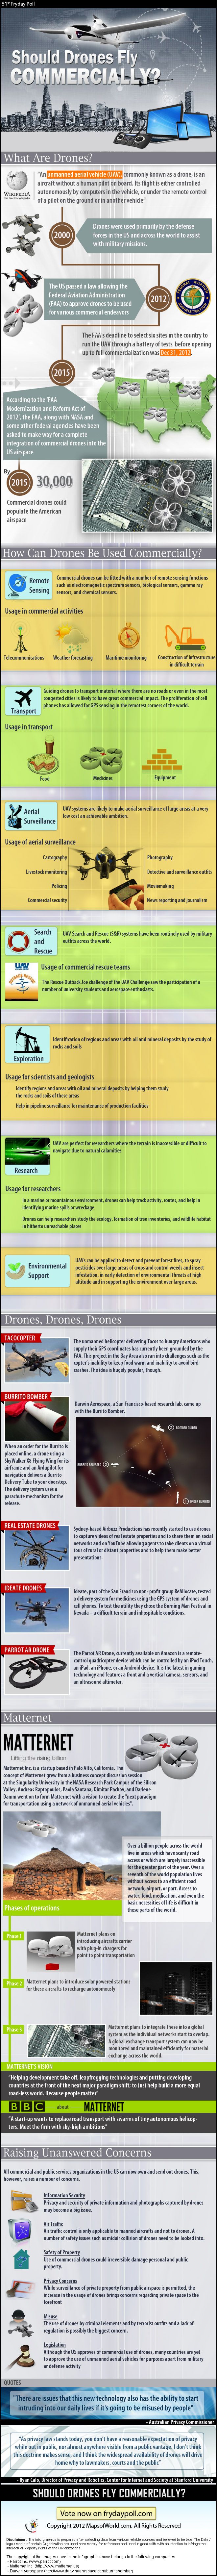 Find In-depth Review And Infographic on Commercial Uses of Drones. Learn more ab...